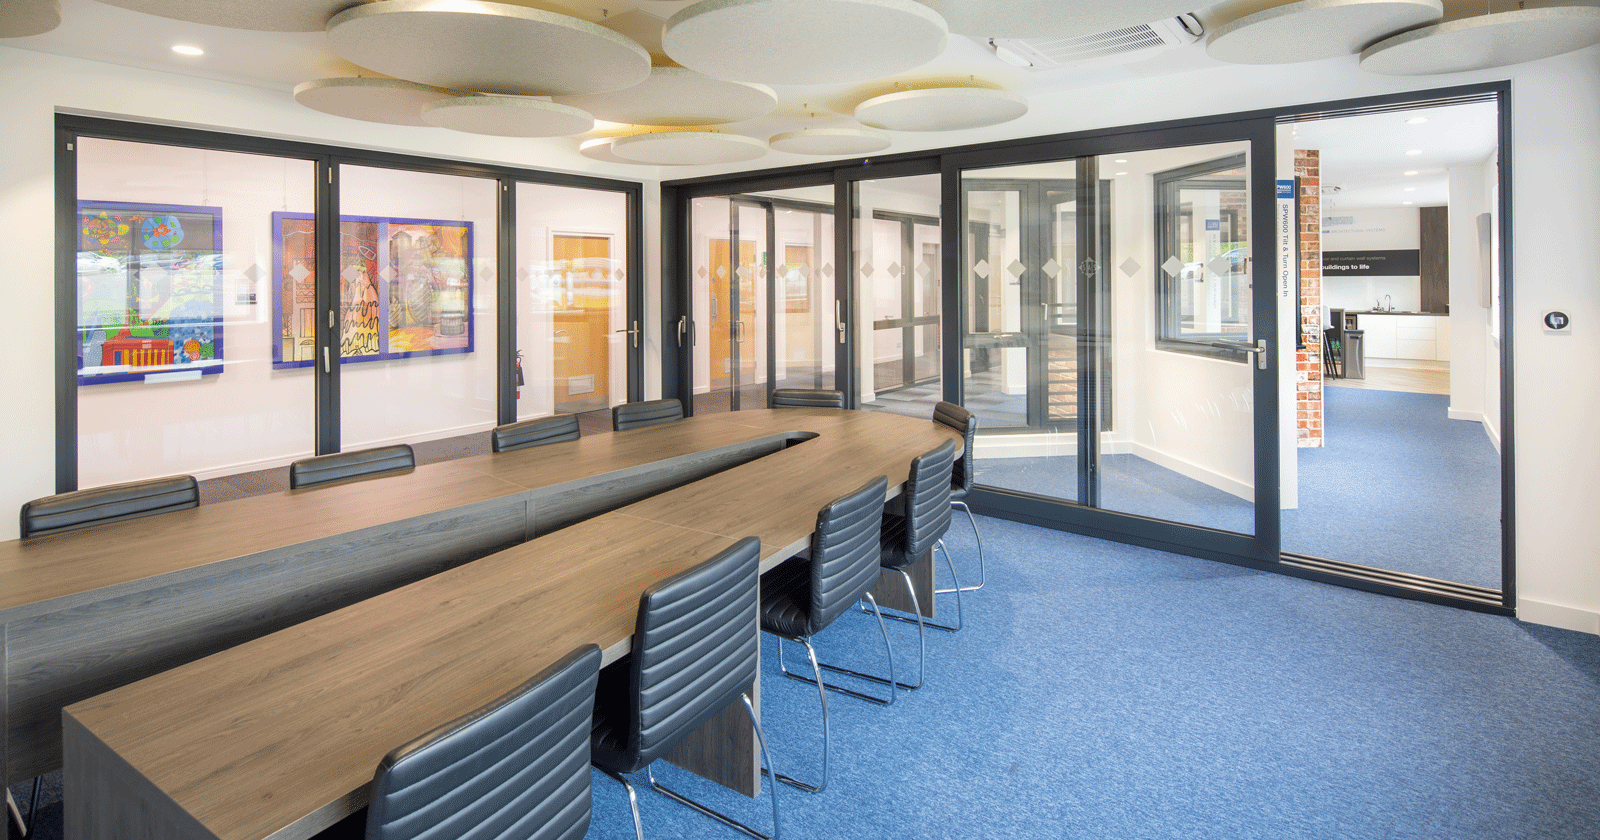 SAS boardroom and feature ceiling